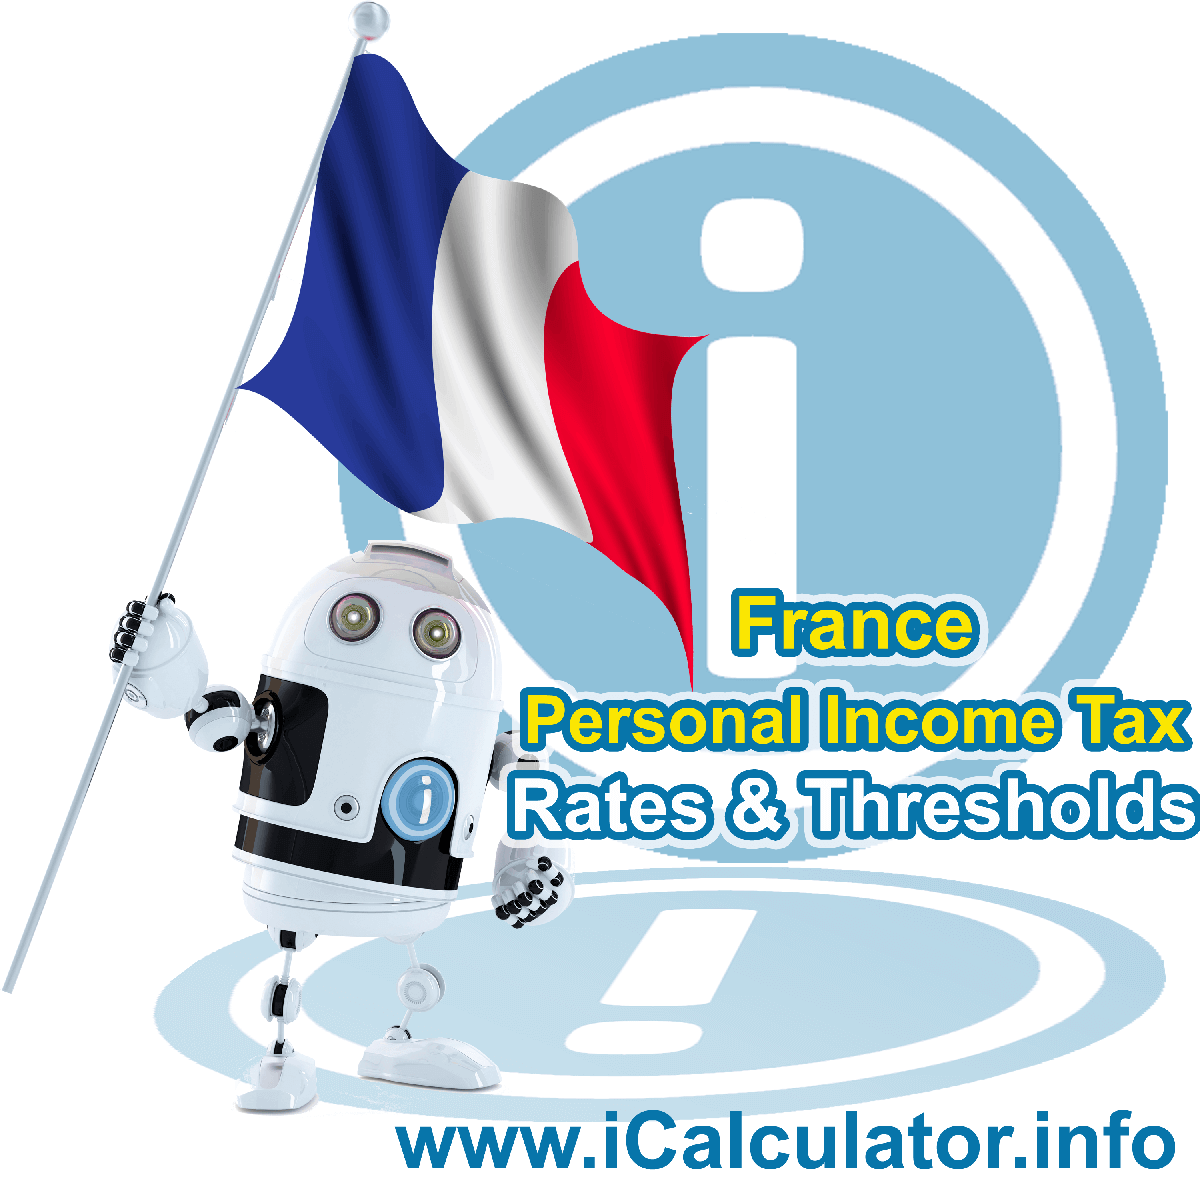 France Personal Income Tax Rates and Allowances in 2019. This image shows the France flag and information relating to the income tax formula and payroll formulas used for calculating income Tax in France using the France personal income tax rates, thresholds and allowances in 2023